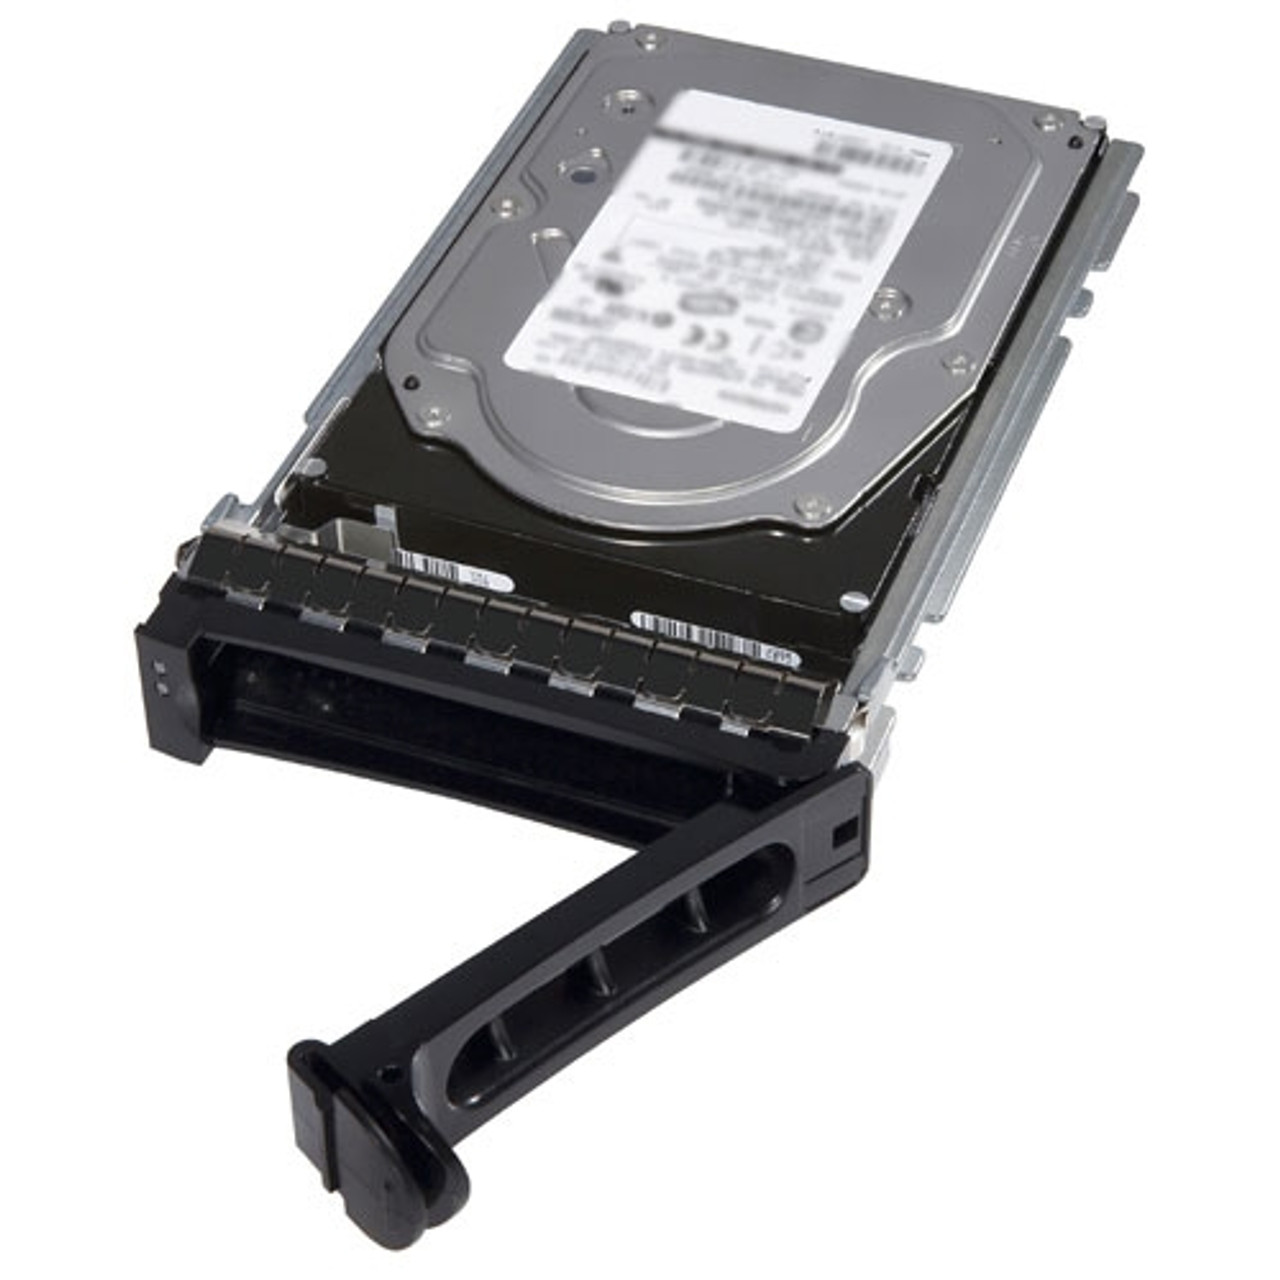 DELL P00JM 6tb 7200rpm Sata-6gbps 512e 128mb Buffer 3.5inch Internal Hard Drive With Tray For 13g Poweredge Server